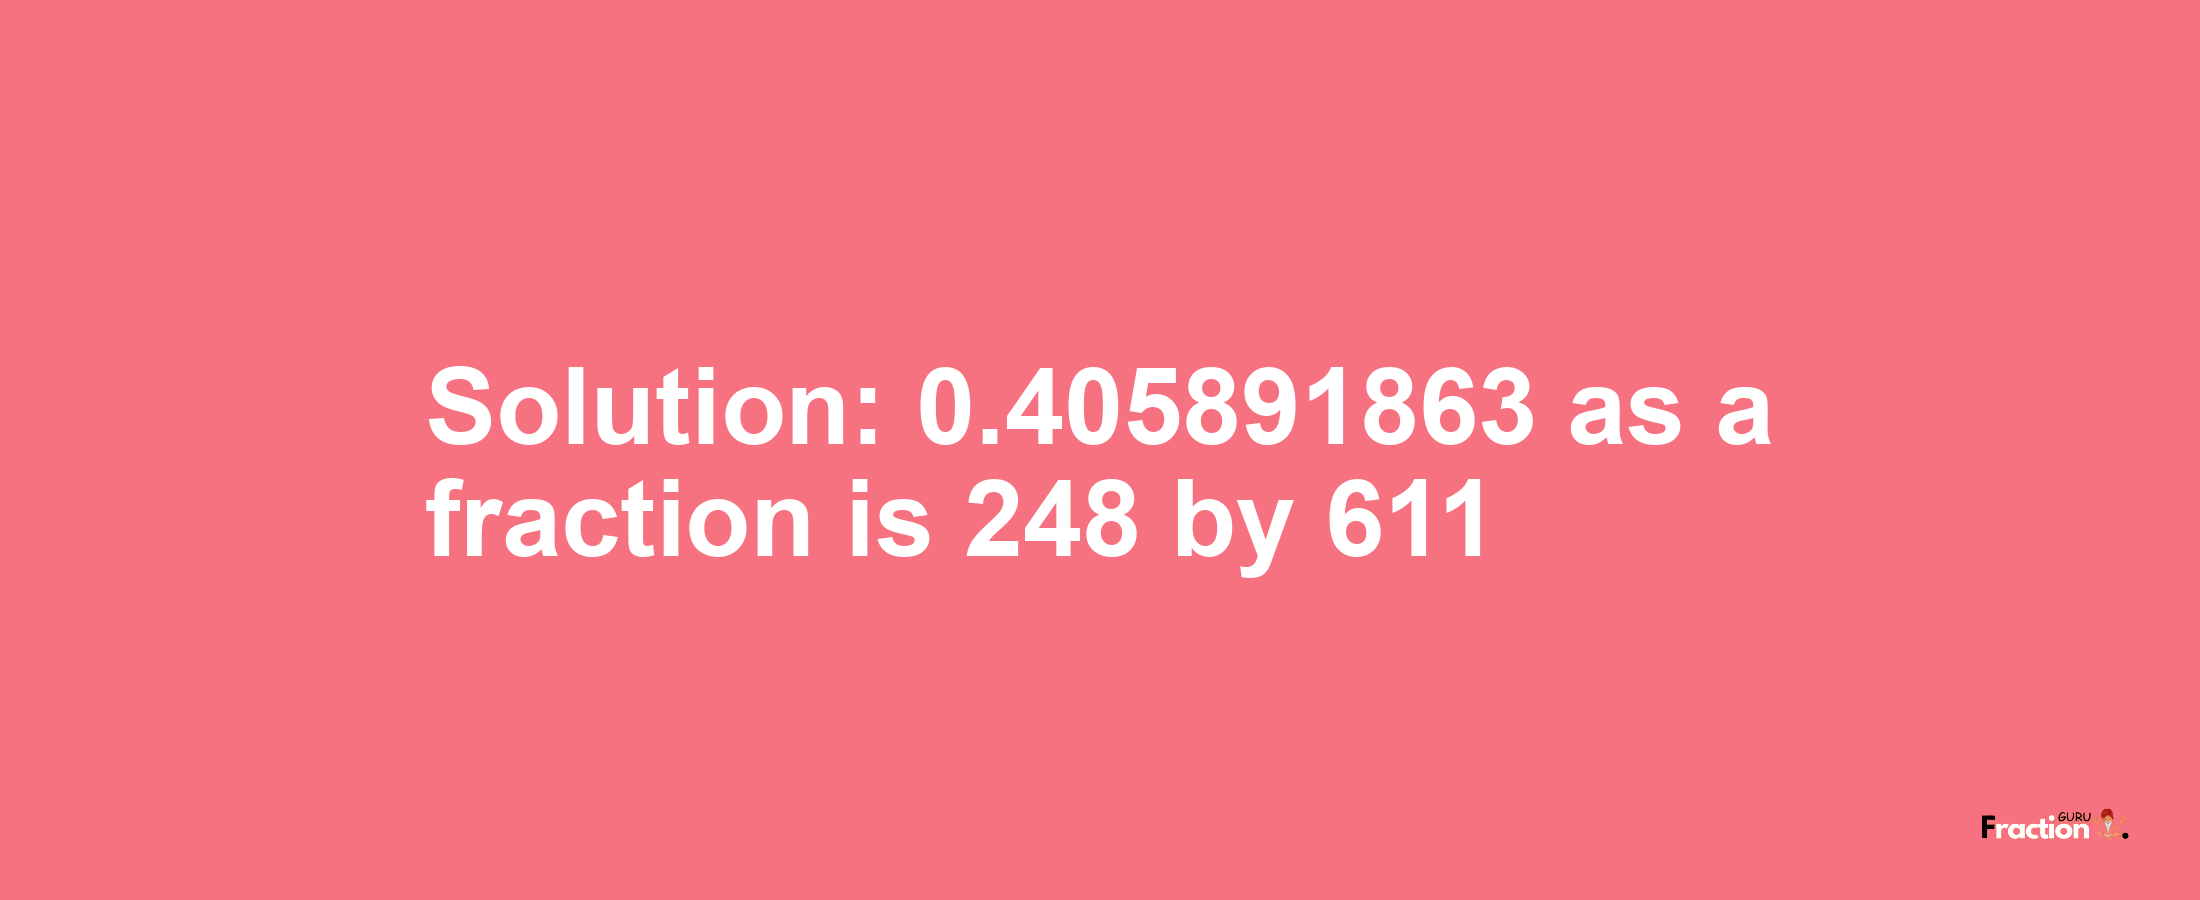 Solution:0.405891863 as a fraction is 248/611